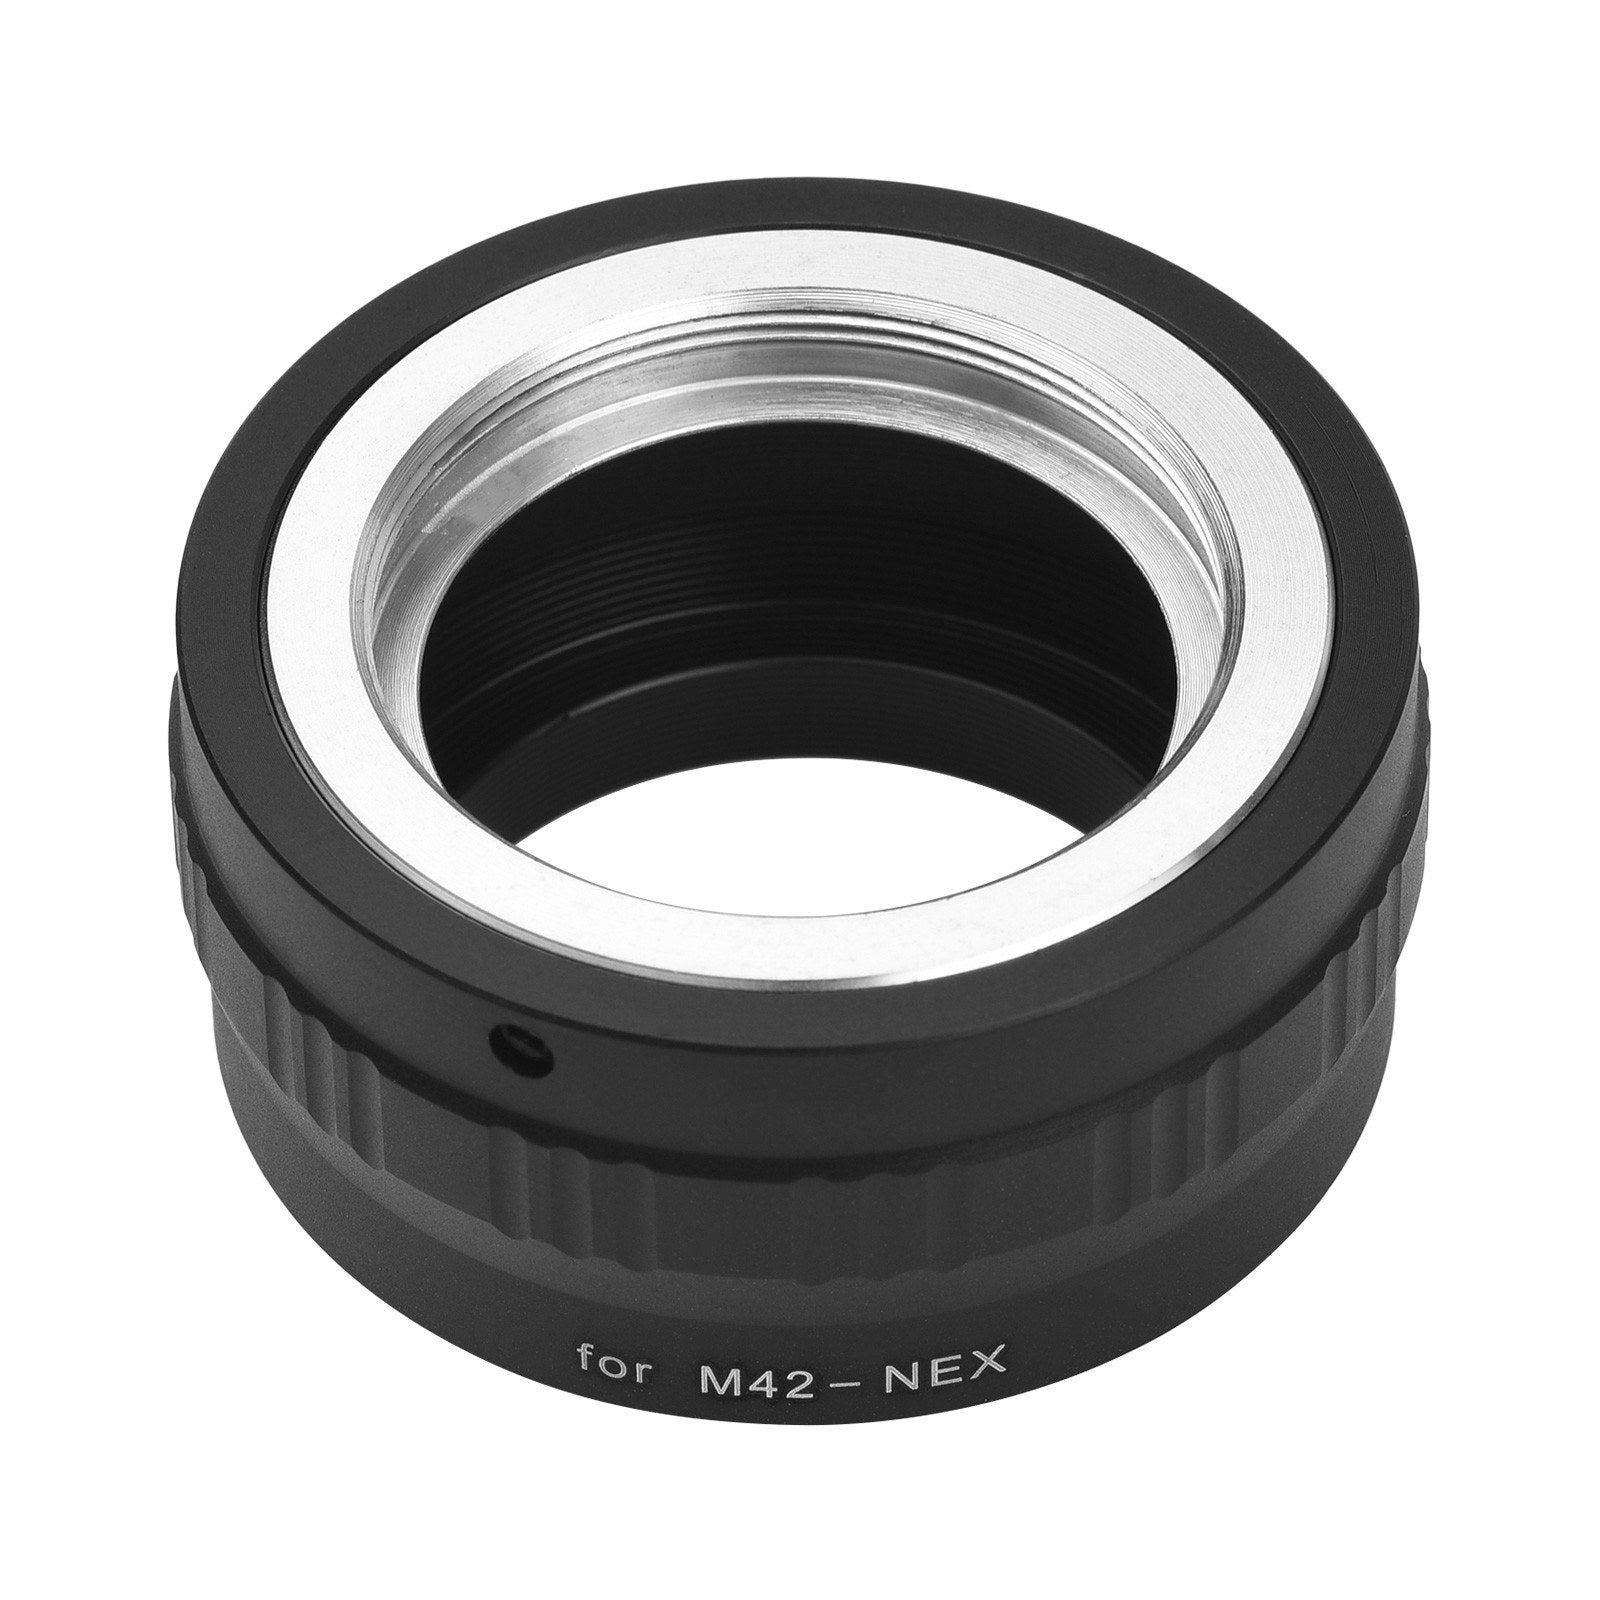 Andoer M42-NEX Rust-proof Impact-resistant Camera Lens Adapter Ring Replacement for M42 Lens to Sony NEX E Mount Cameras NEX 3 3C 3N 5 5C 5N 5R 5T 6 7 F3 A6000 A5000 A3500 A3000 Alpha A7 A7R VG10